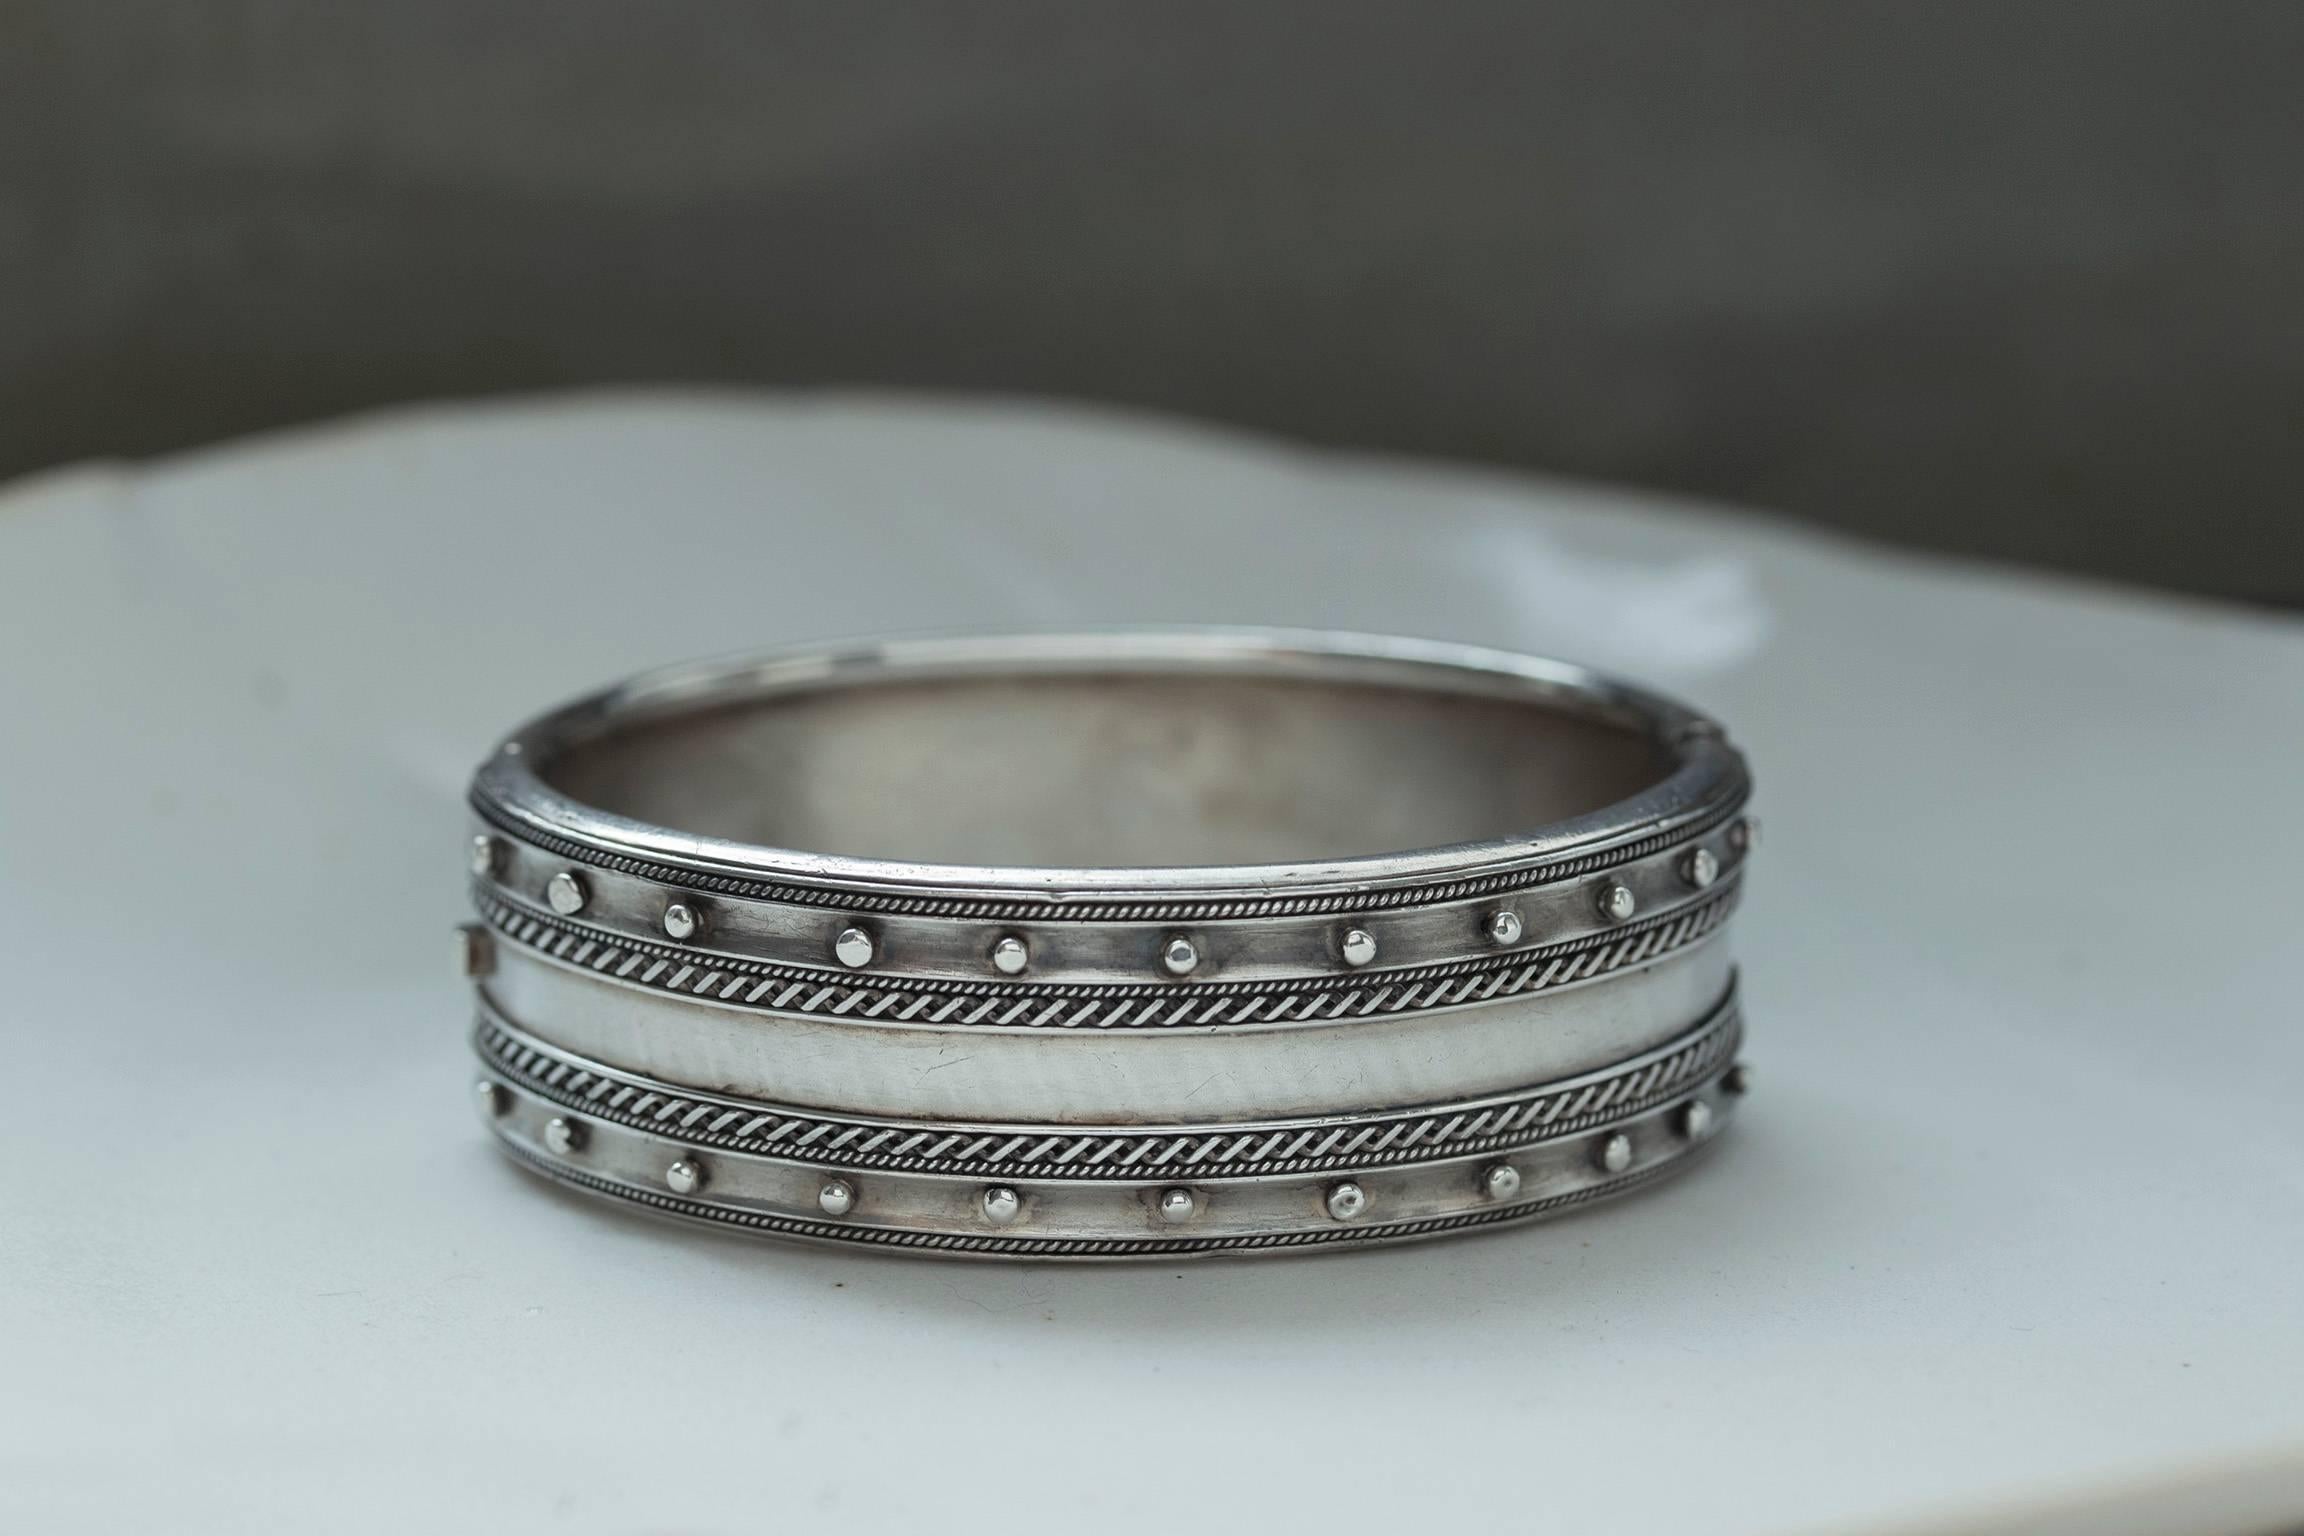 C.1880. A Victorian sterling silver bangle. The bangle has a very modern and simple look. The closure works perfectly. Overall in good condition.

Width: Approximately 0.70